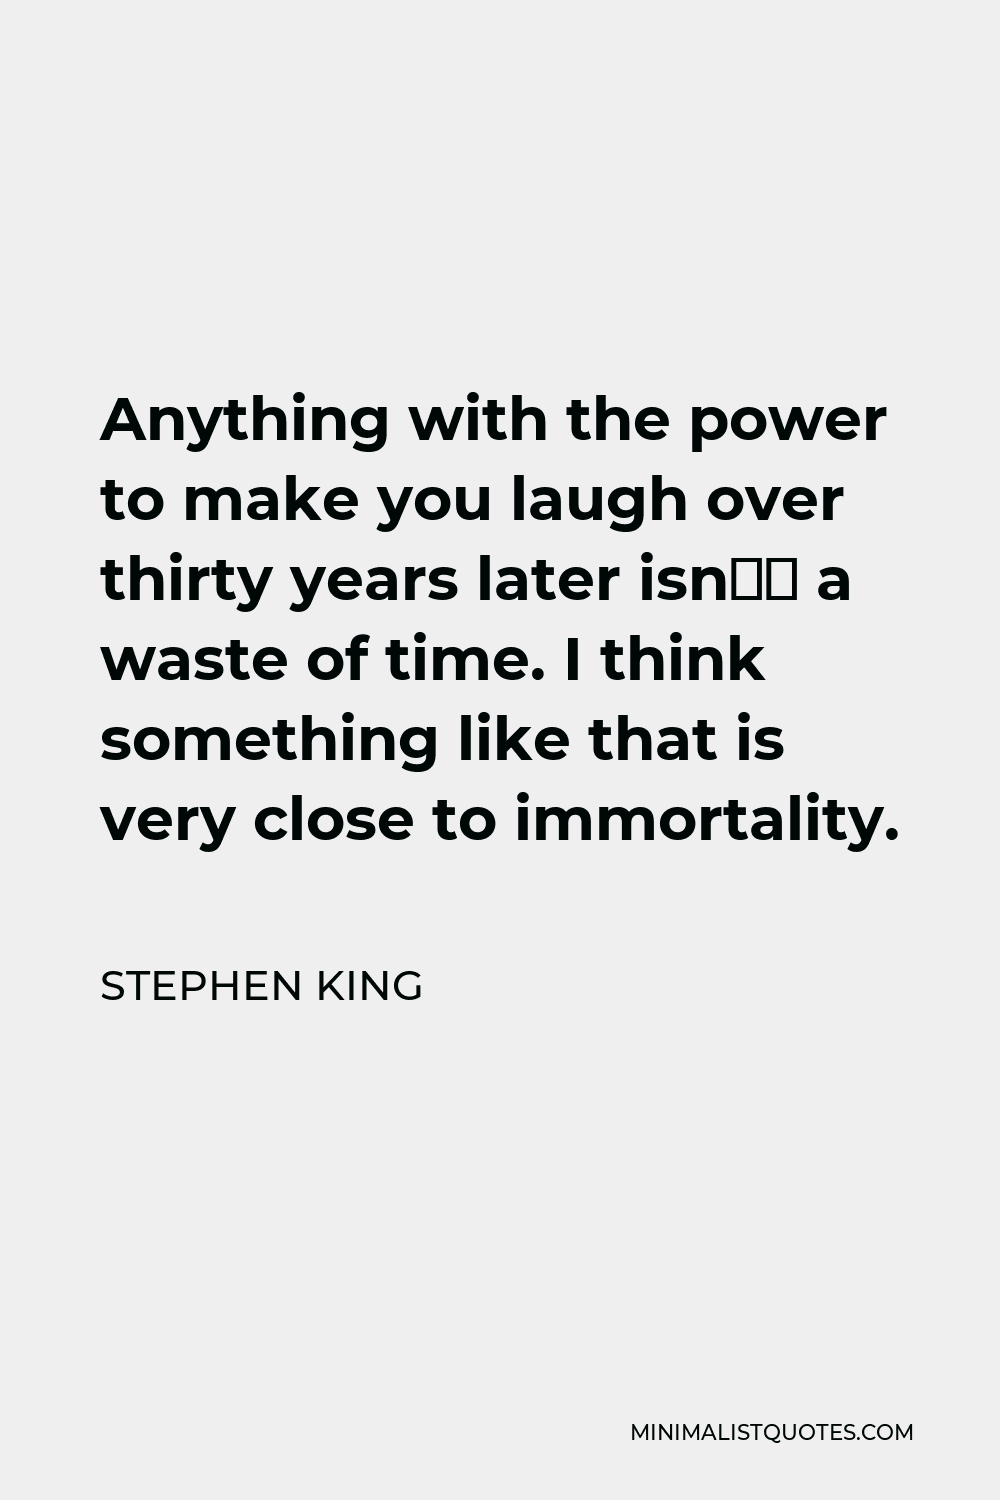 Stephen King Quote - Anything with the power to make you laugh over thirty years later isn’t a waste of time. I think something like that is very close to immortality.